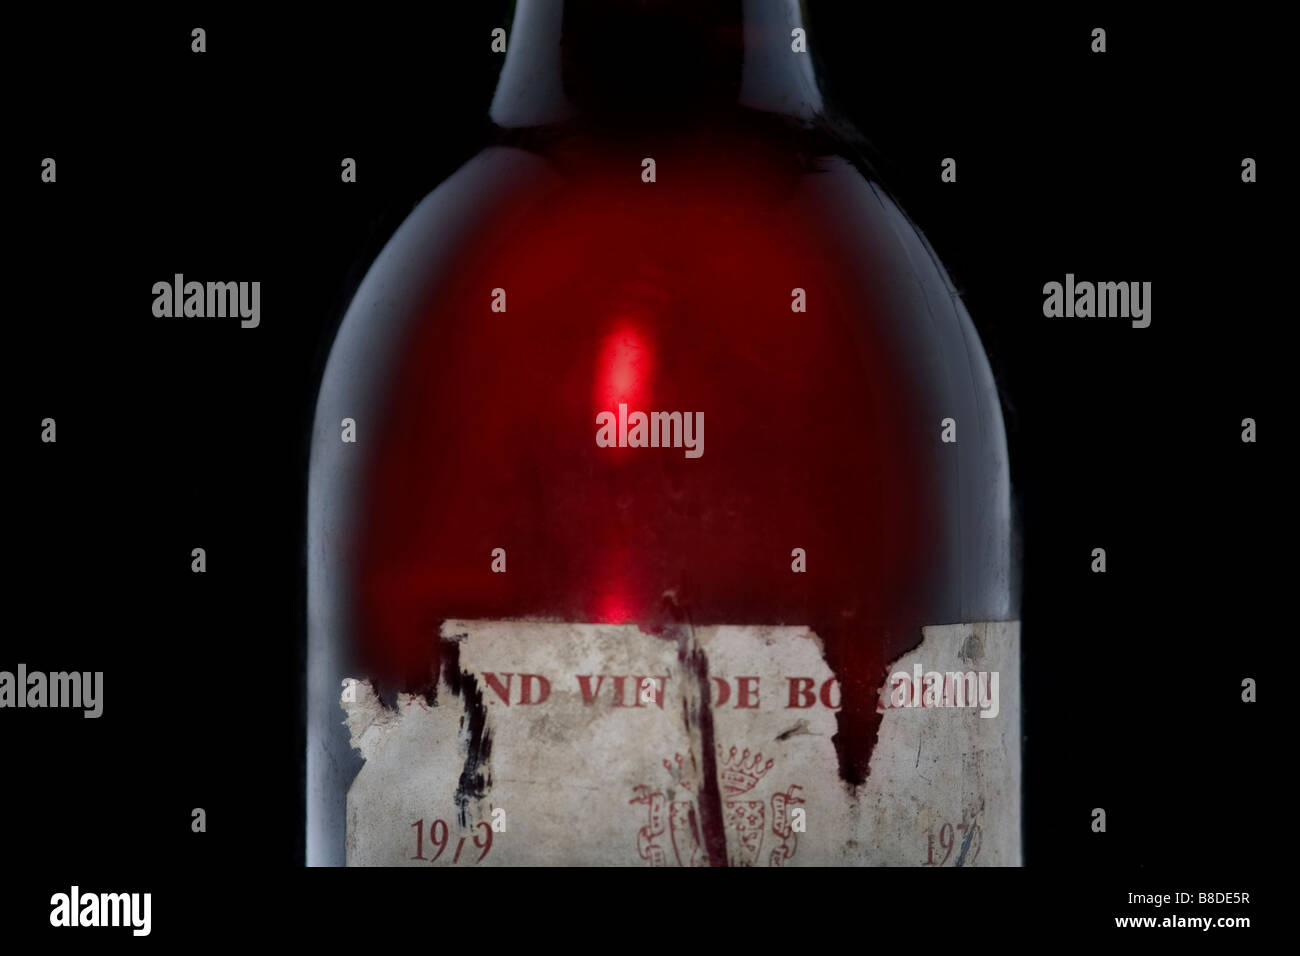 1/2 length study of 1979 Bordeaux red wine bottle. back and side lighting Stock Photo